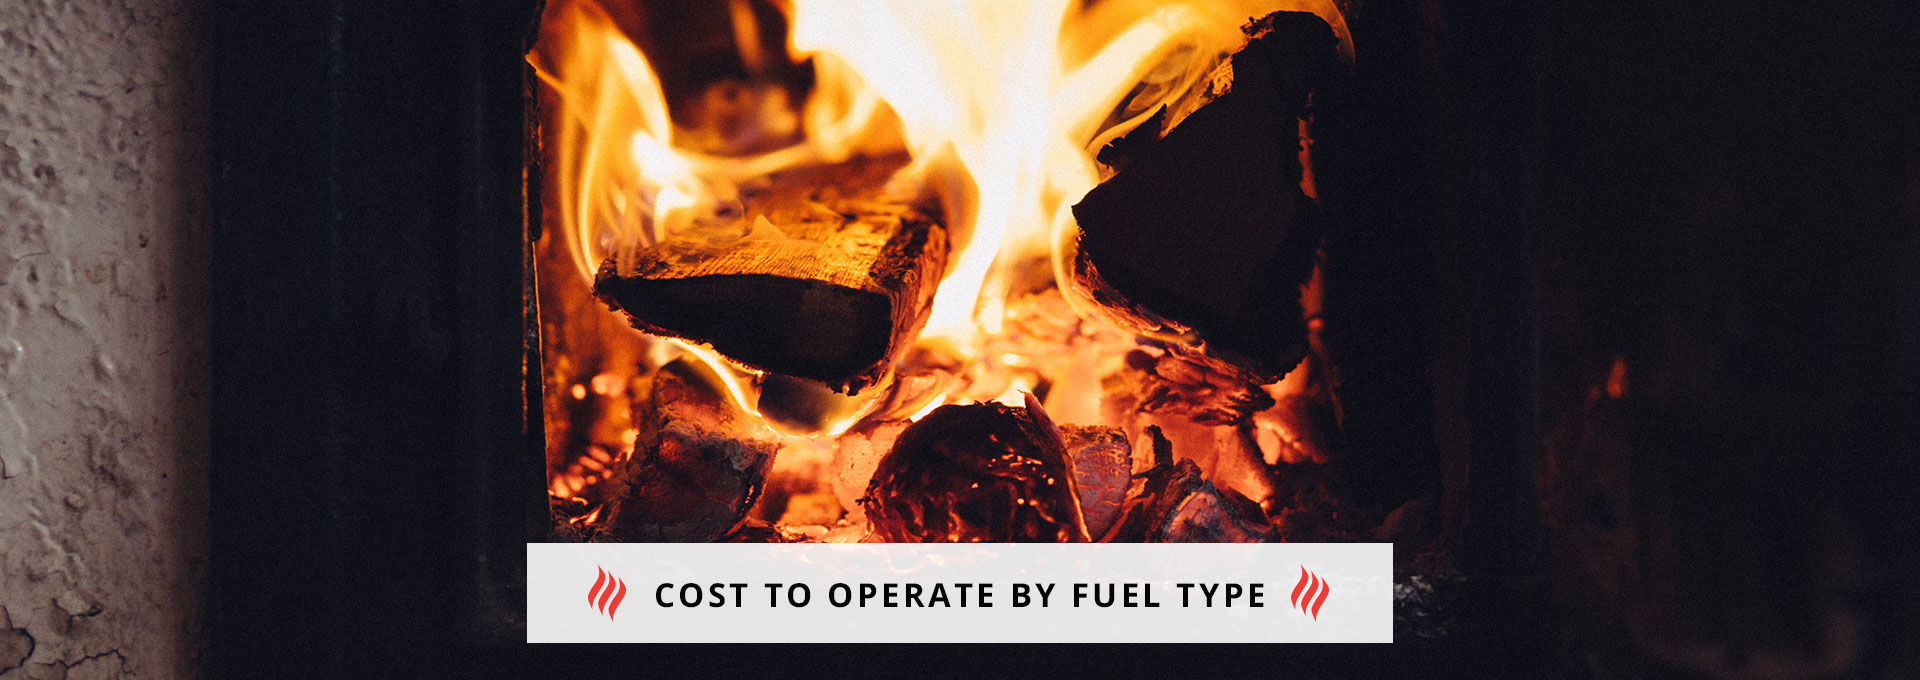 Cost to Operate Different Fireplaces by Fuel Type 